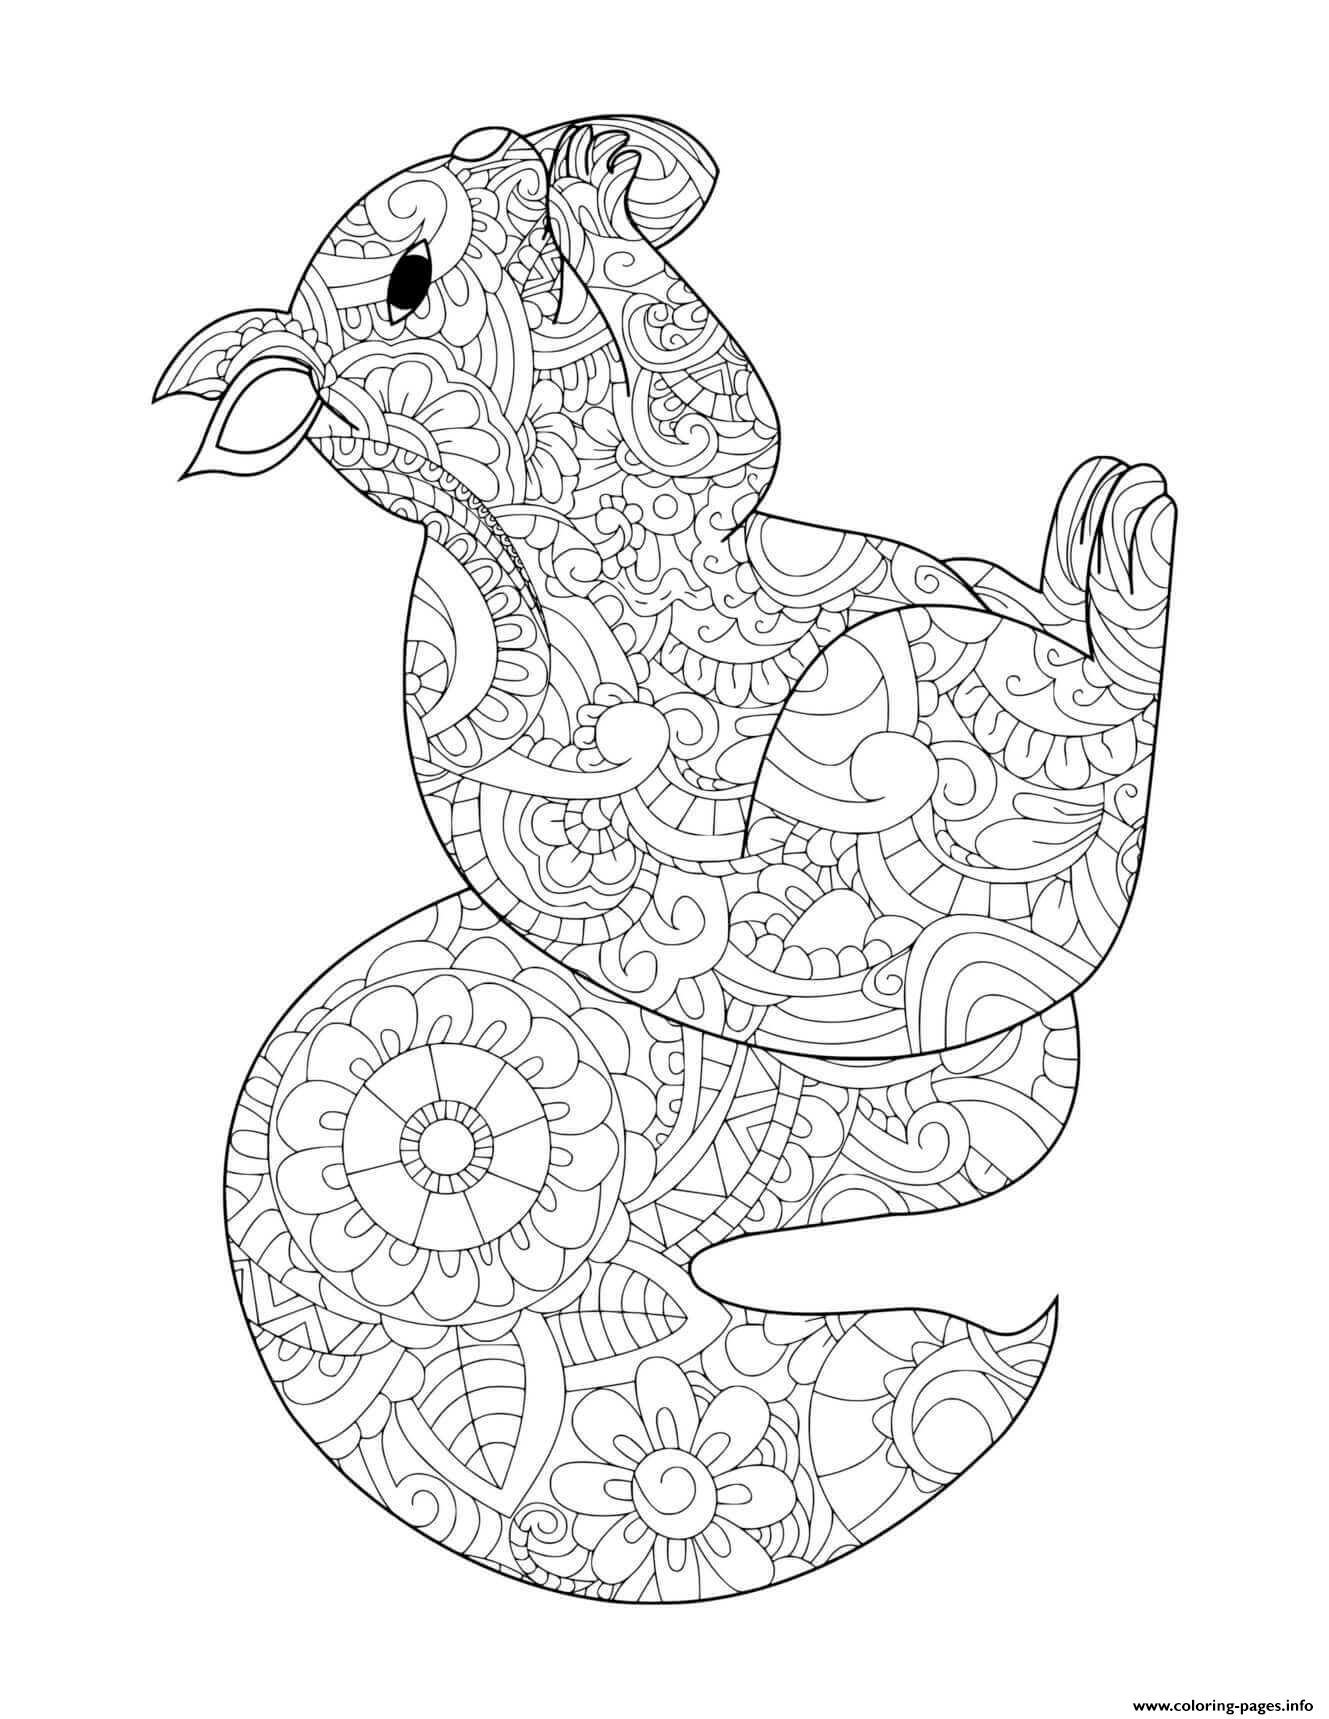 Fall Patterned Squirrel With Acorn For Adults Coloring Pages Printable